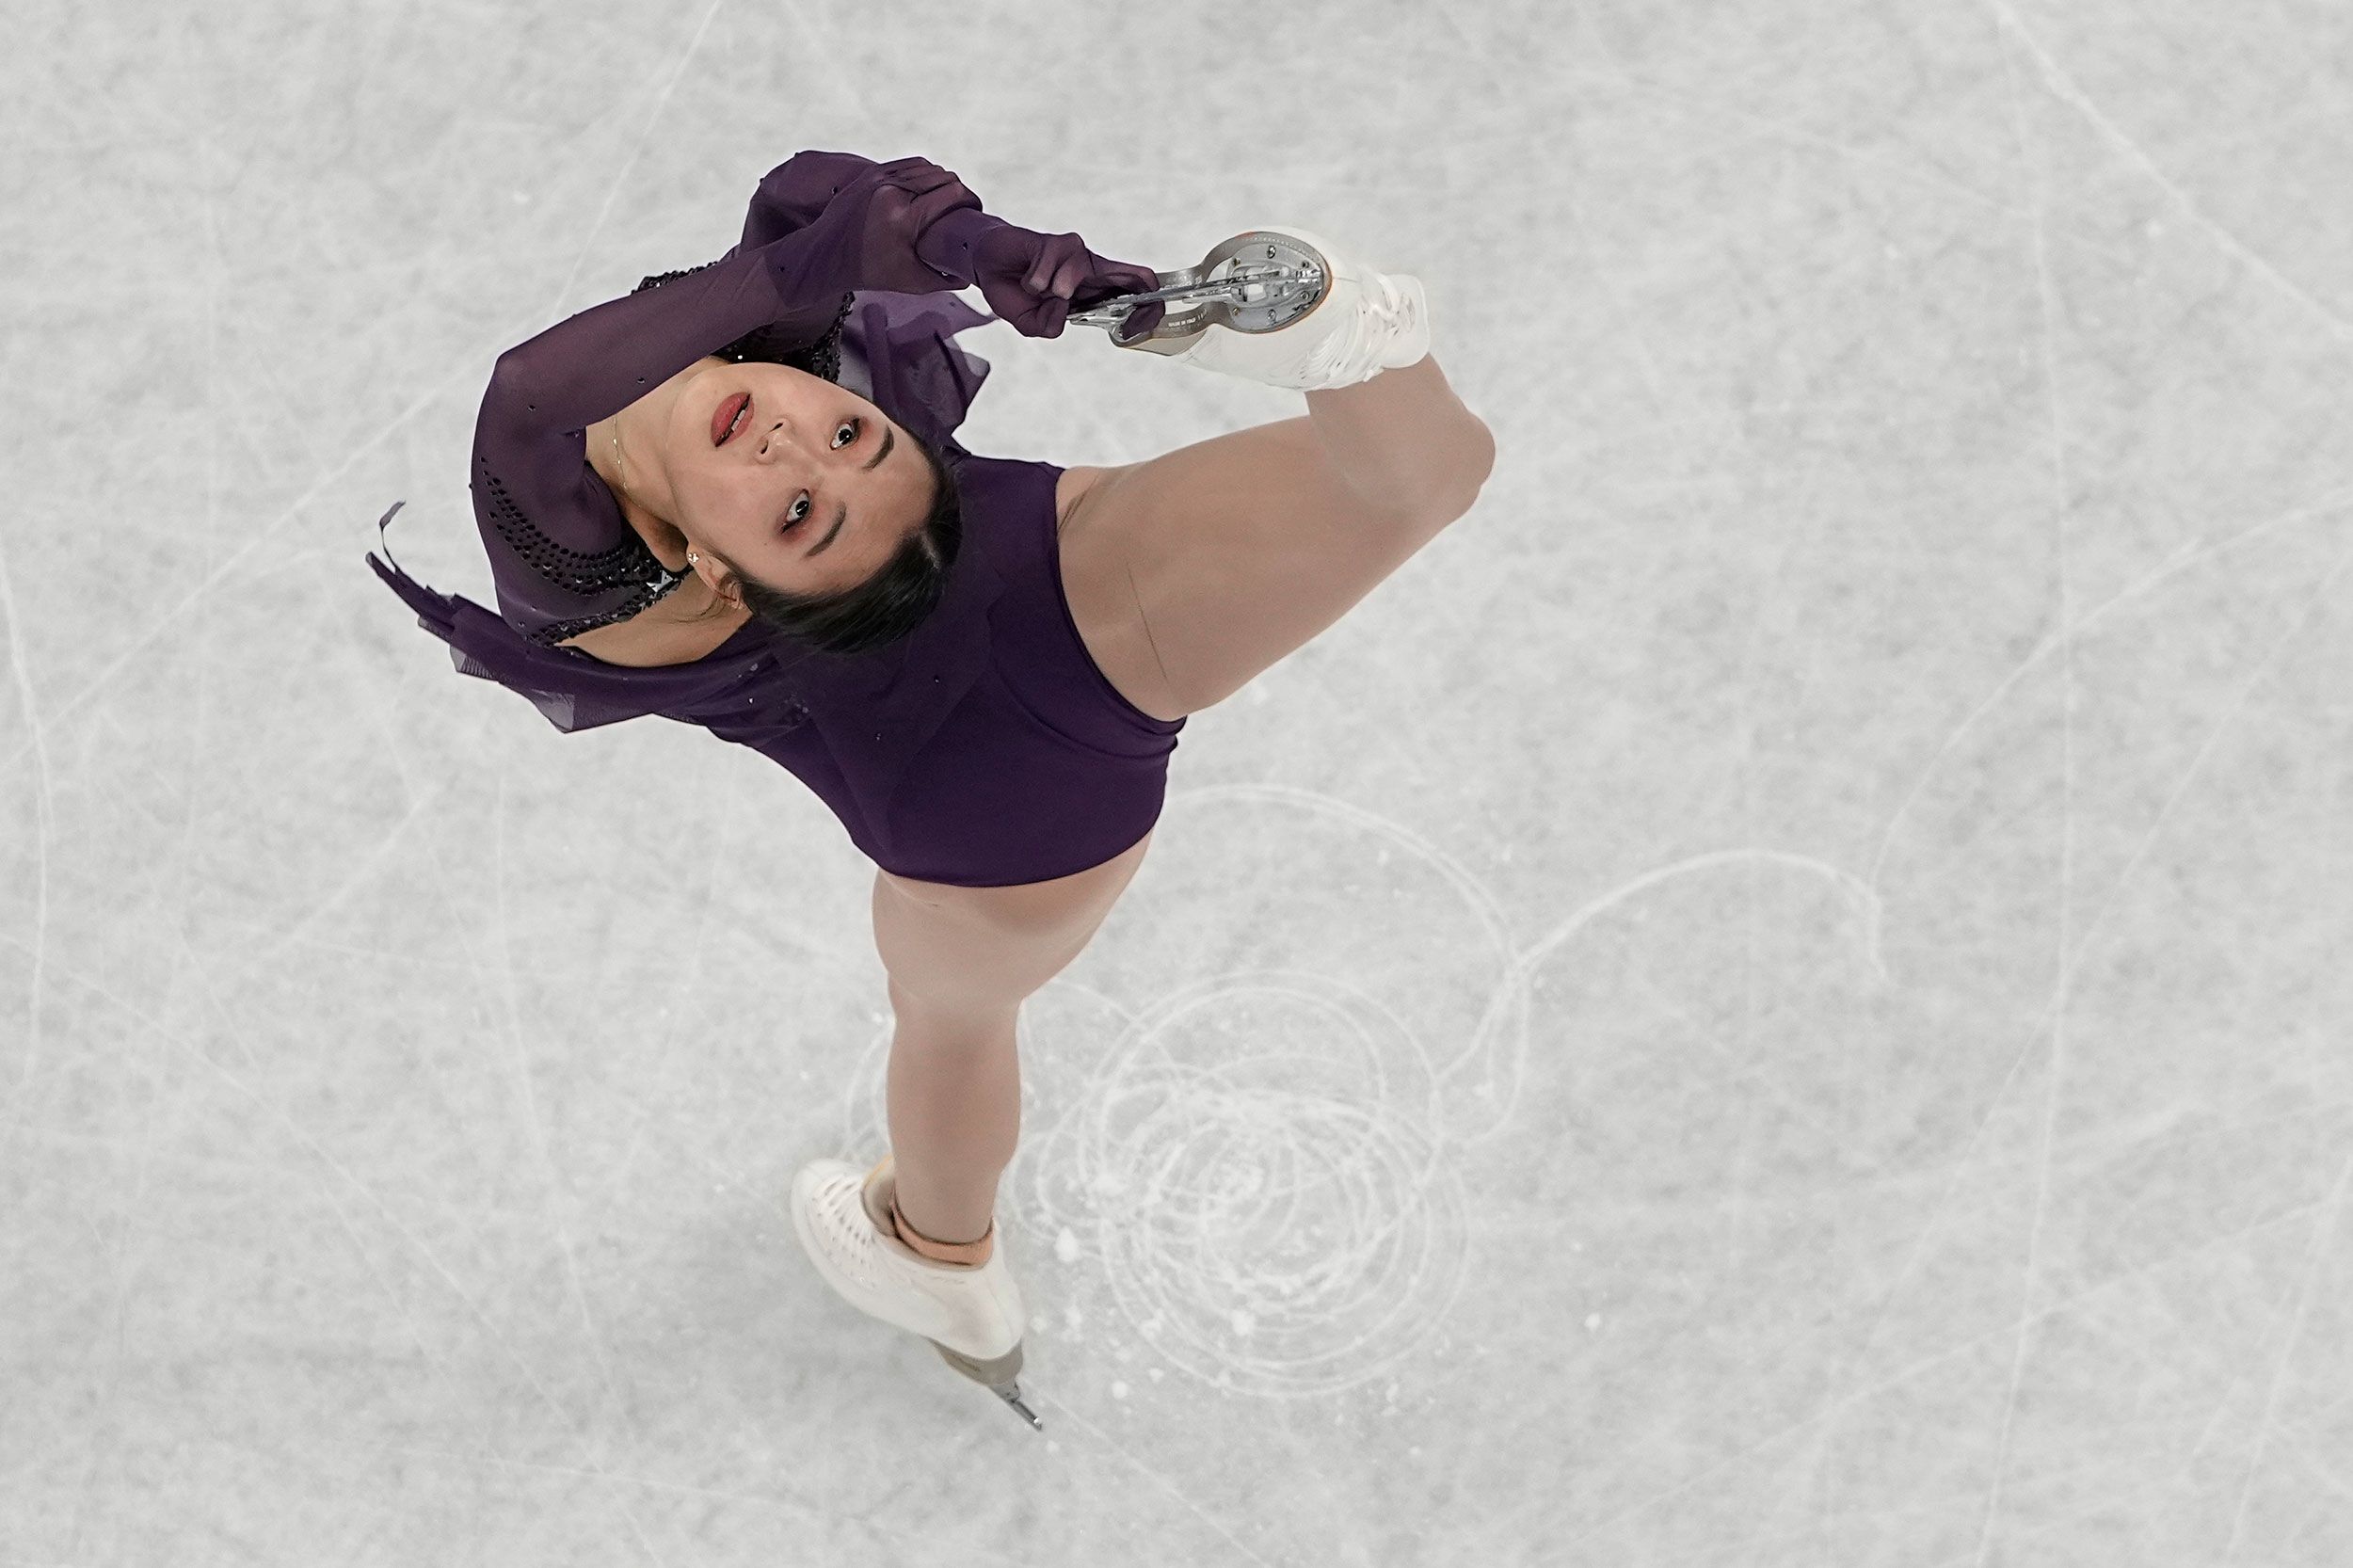 Why Olympic figure skaters don't get dizzy from spinning